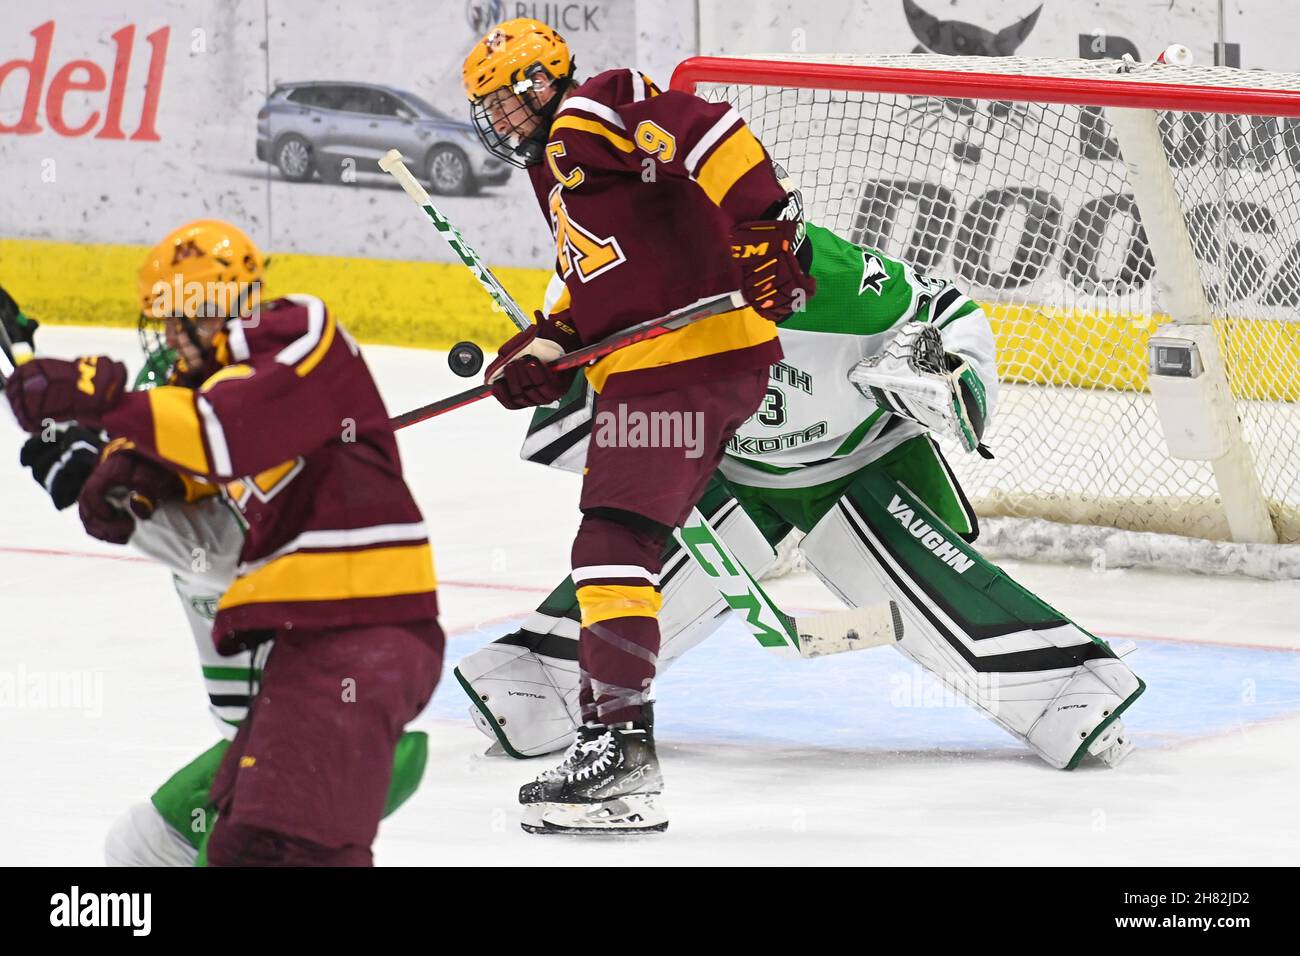 North Dakota, USA. 26th Nov, 2021. November 26, 2021 Minnesota Gophers forward Sammy Walker (9) attempts to deflect a puck towards North Dakota Fighting Hawks goaltender Zach Driscoll (33) during a NCAA men's hockey game between the Minnesota Gophers and the University of North Dakota Fighting Hawks at Ralph Engelstad Arena in Grand Forks, ND. By Russell Hons/CSM Credit: Cal Sport Media/Alamy Live News Stock Photo